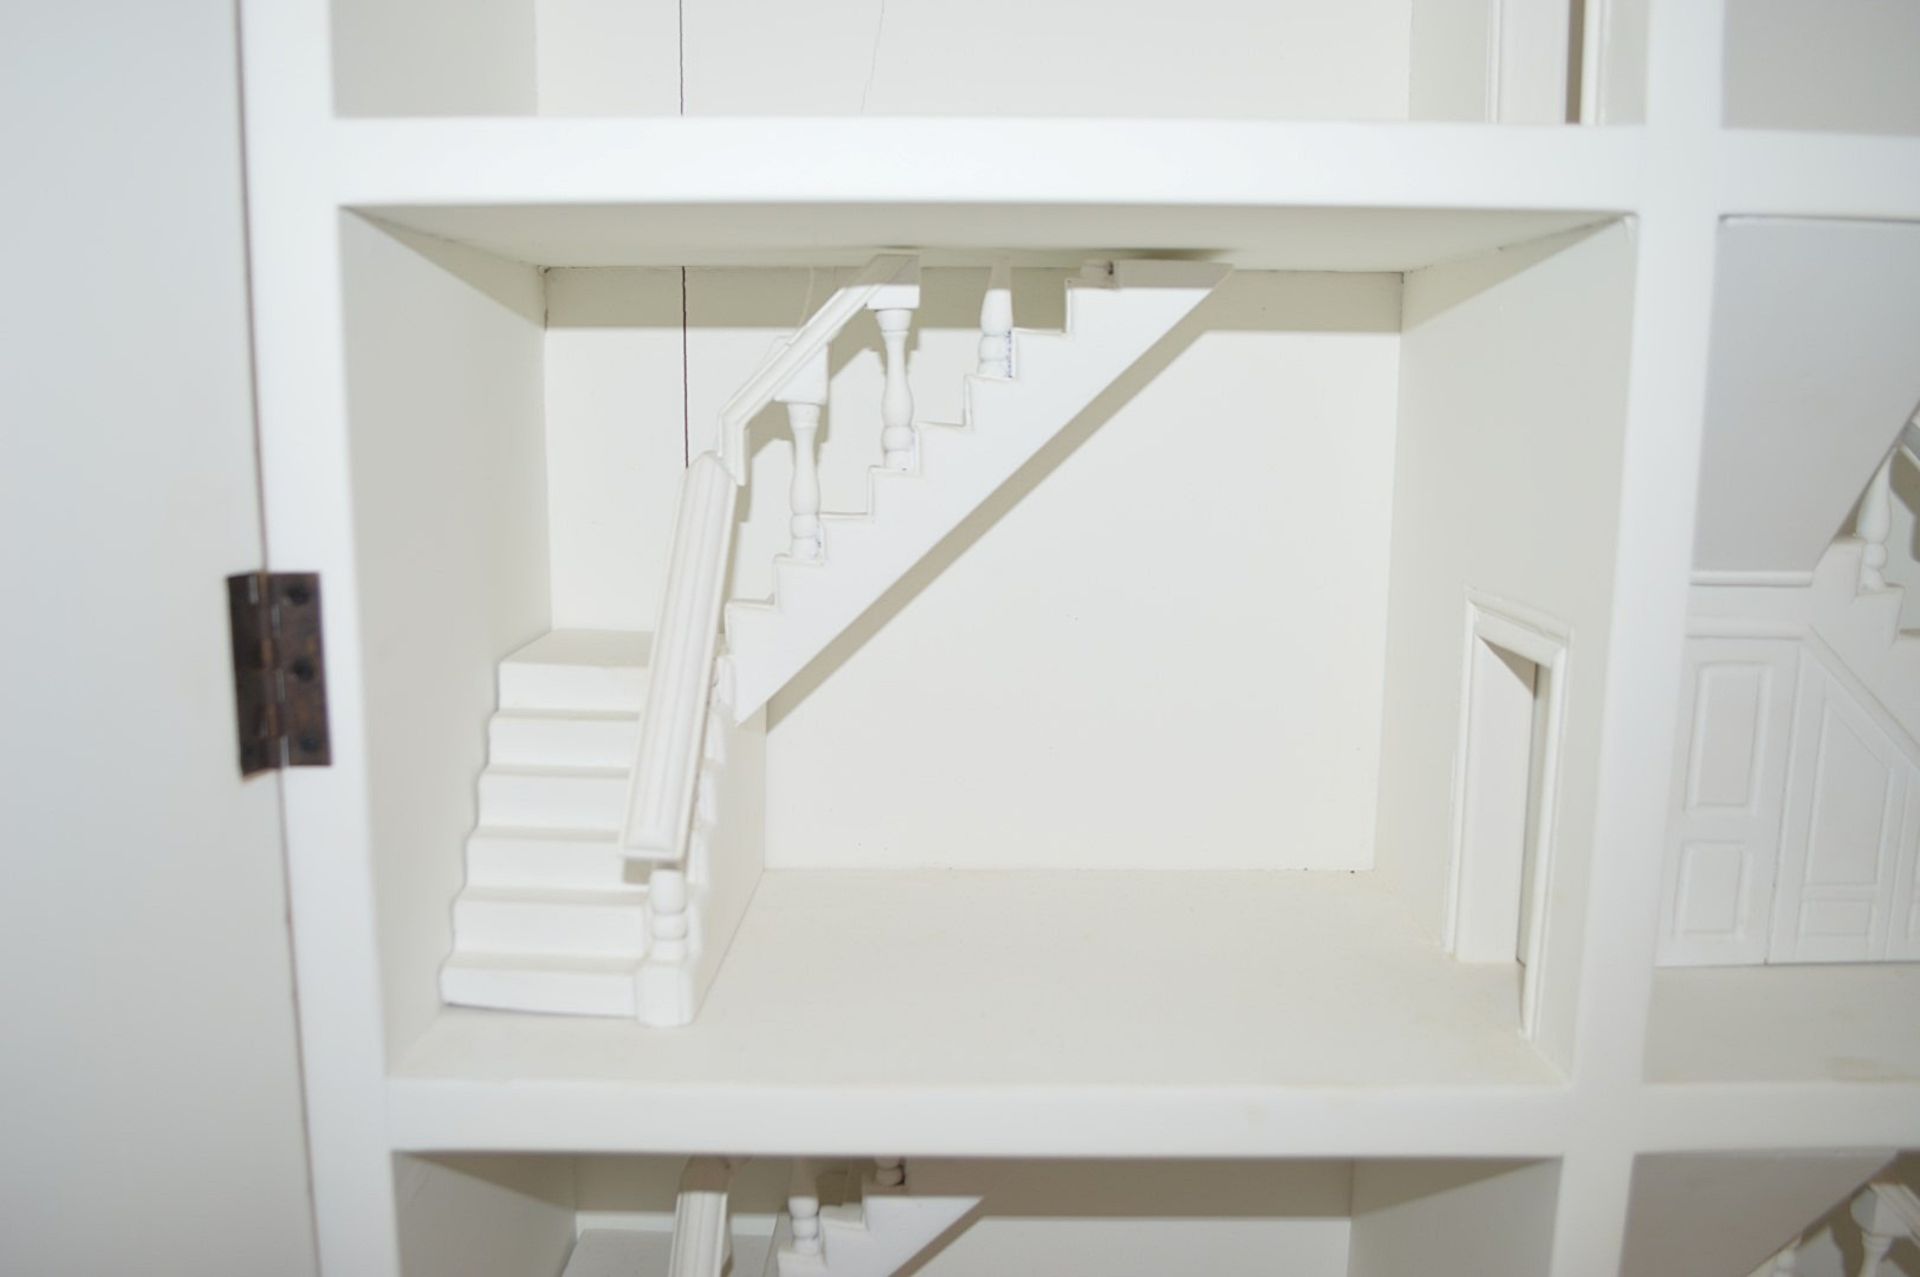 1 x Impressive Bespoke Hand Crafted Wooden Dolls House In White - Image 11 of 19